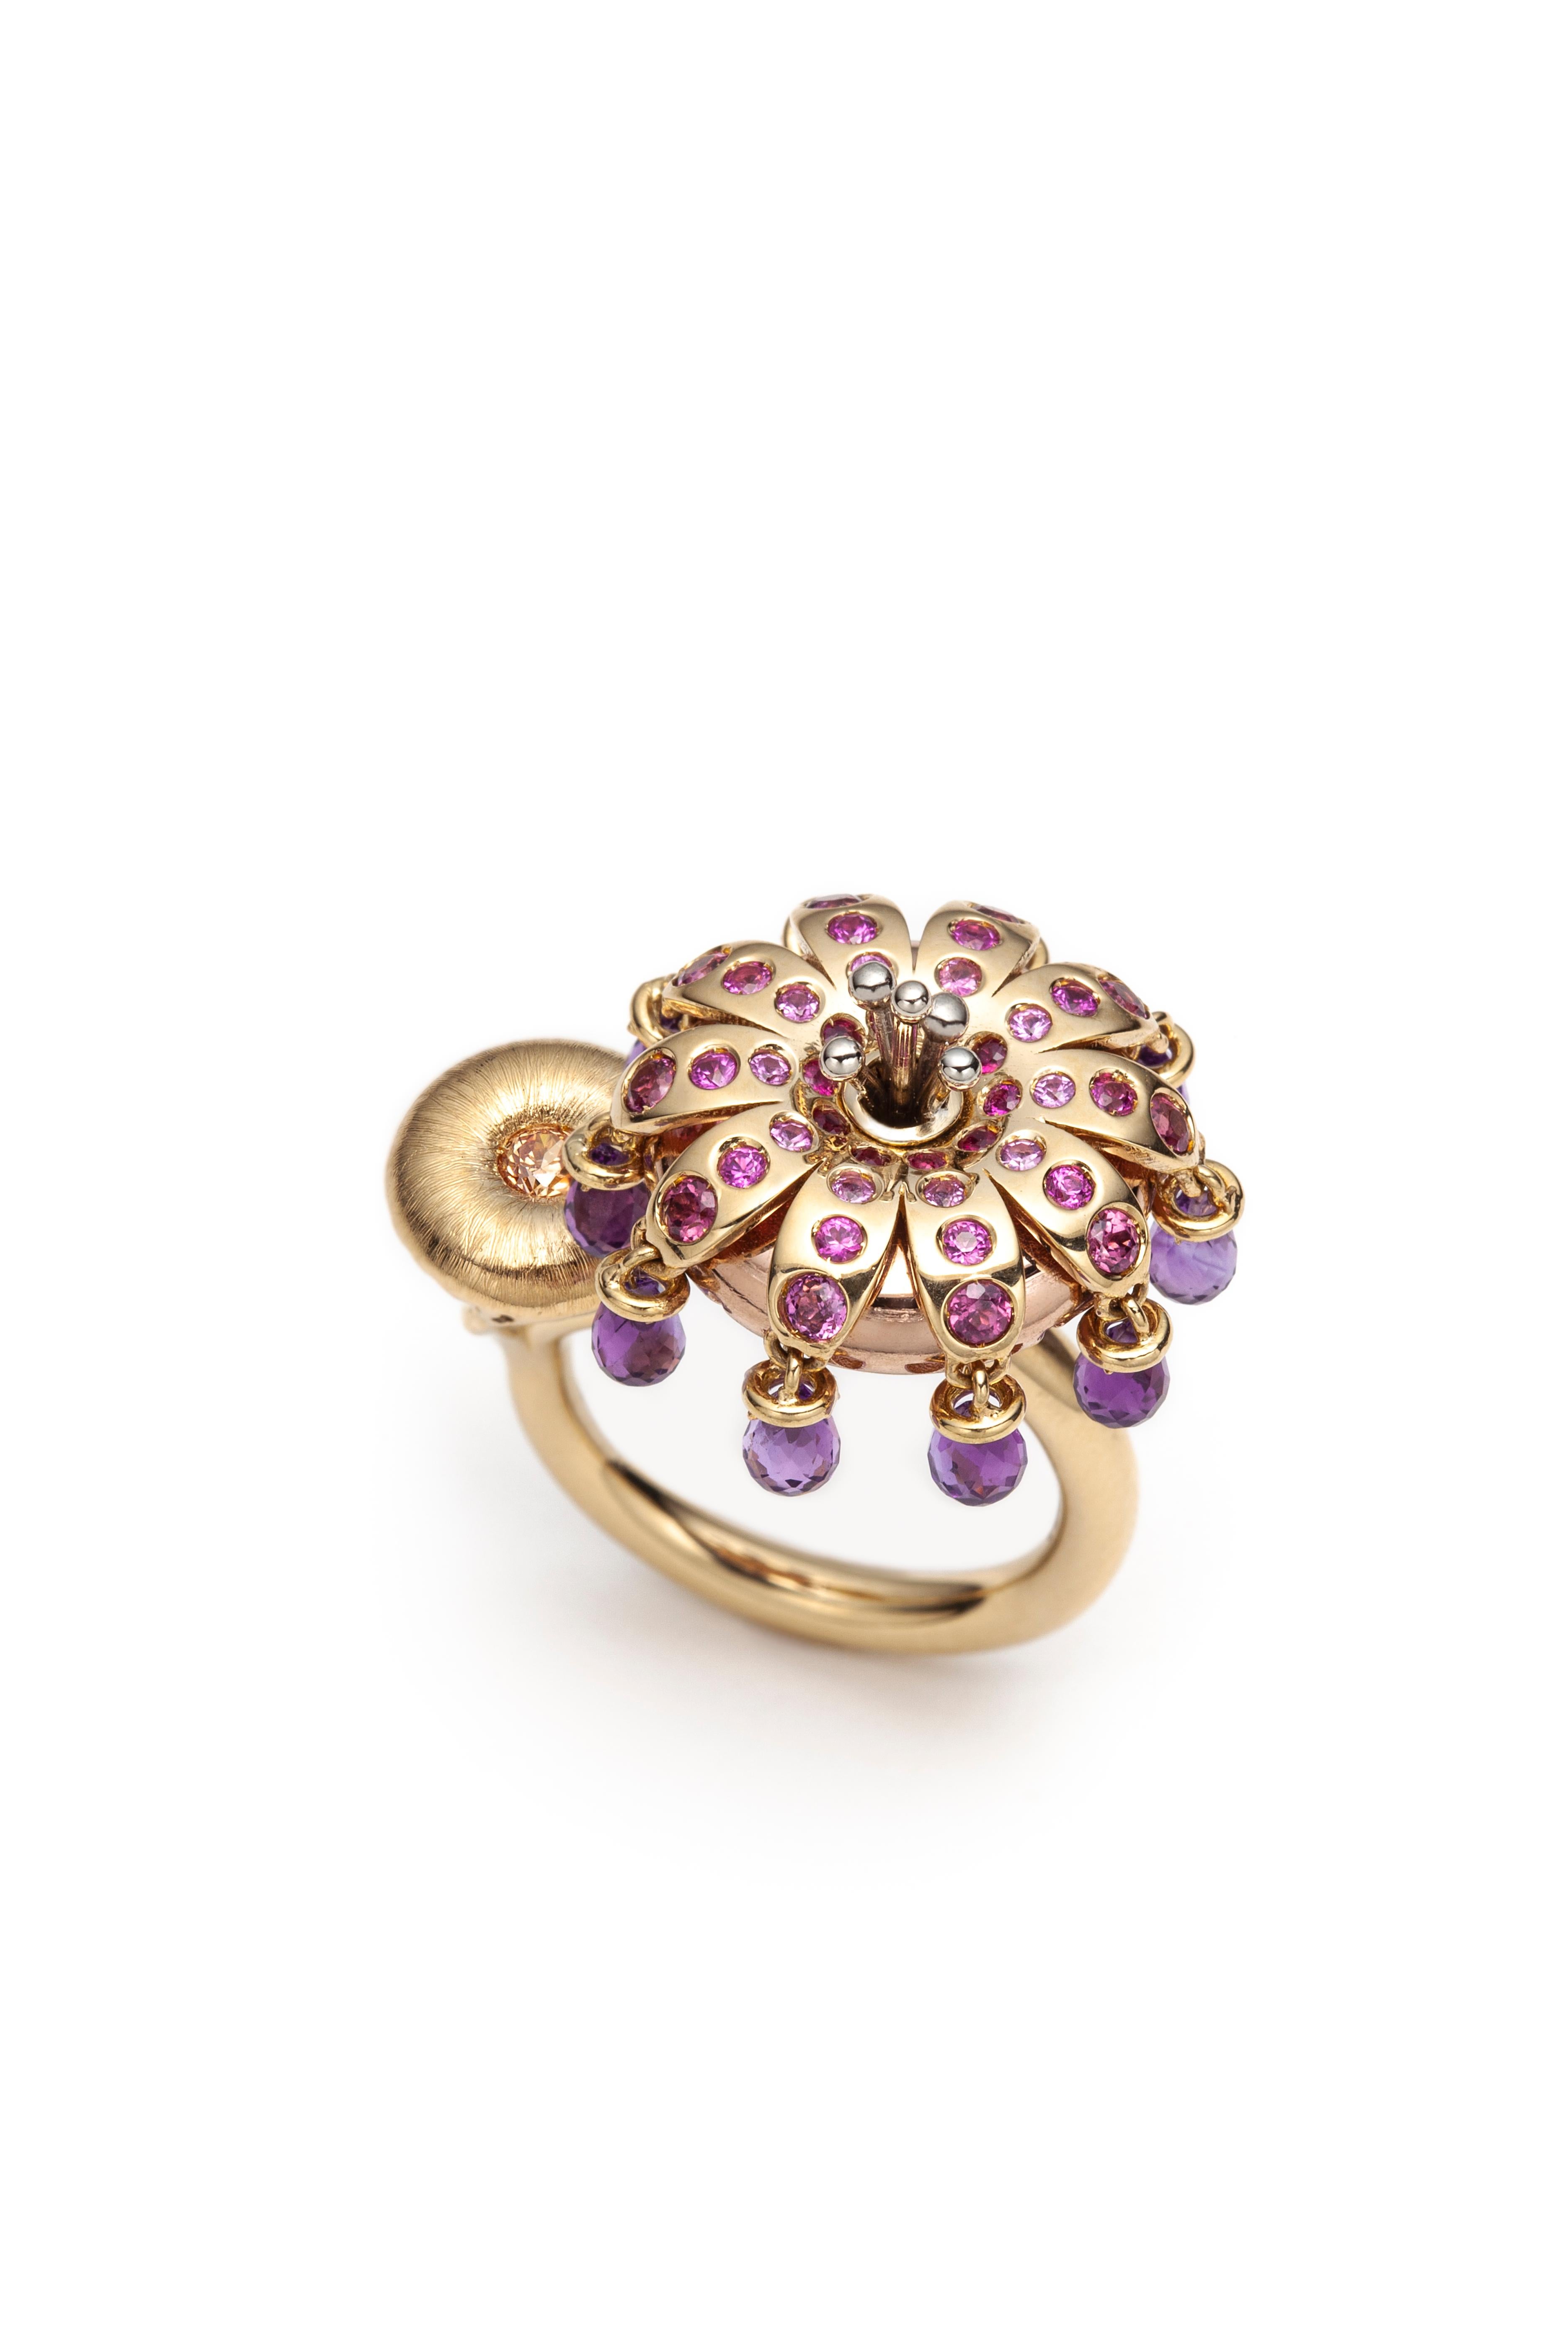 This kinetic ring designed by Lorenzo Serafino, is handcrafted from 18K yellow, pink and white gold and set with pink sapphire and yellow tourmaline. Briolette cut Amethysts hang from the freely rotating flower on the top of the ring.

—What do you